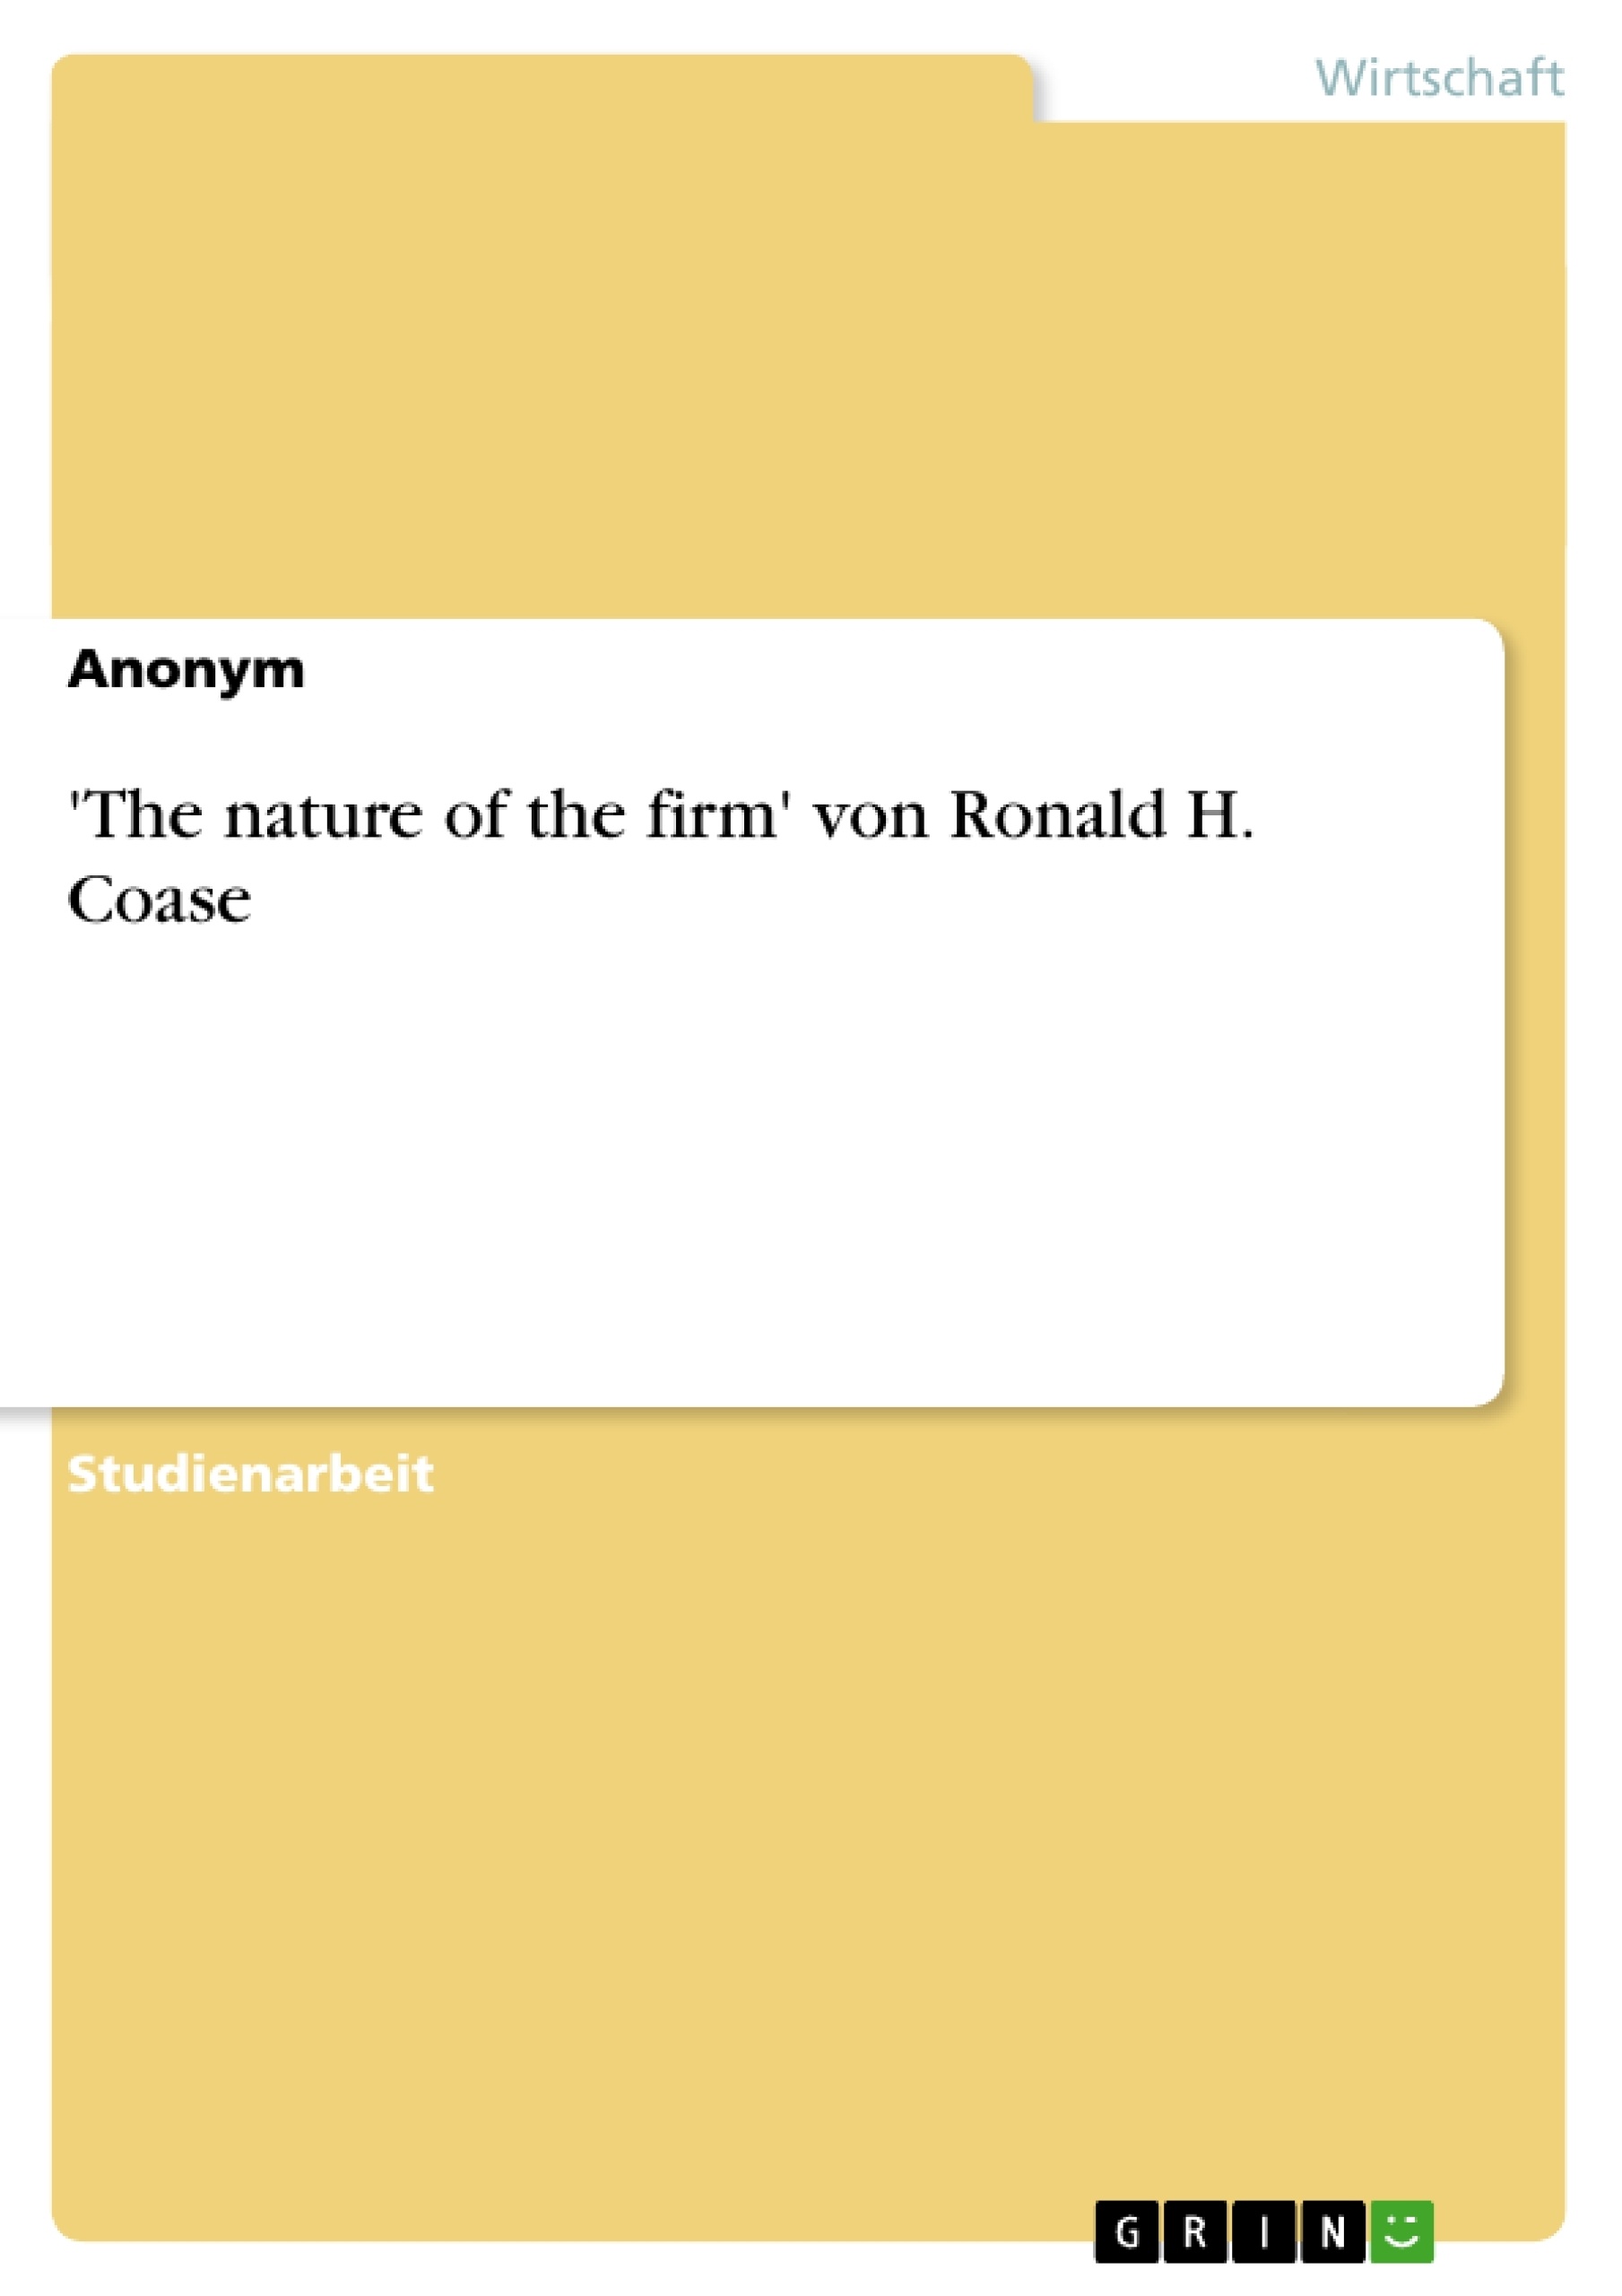 Título: 'The nature of the firm' von Ronald H. Coase